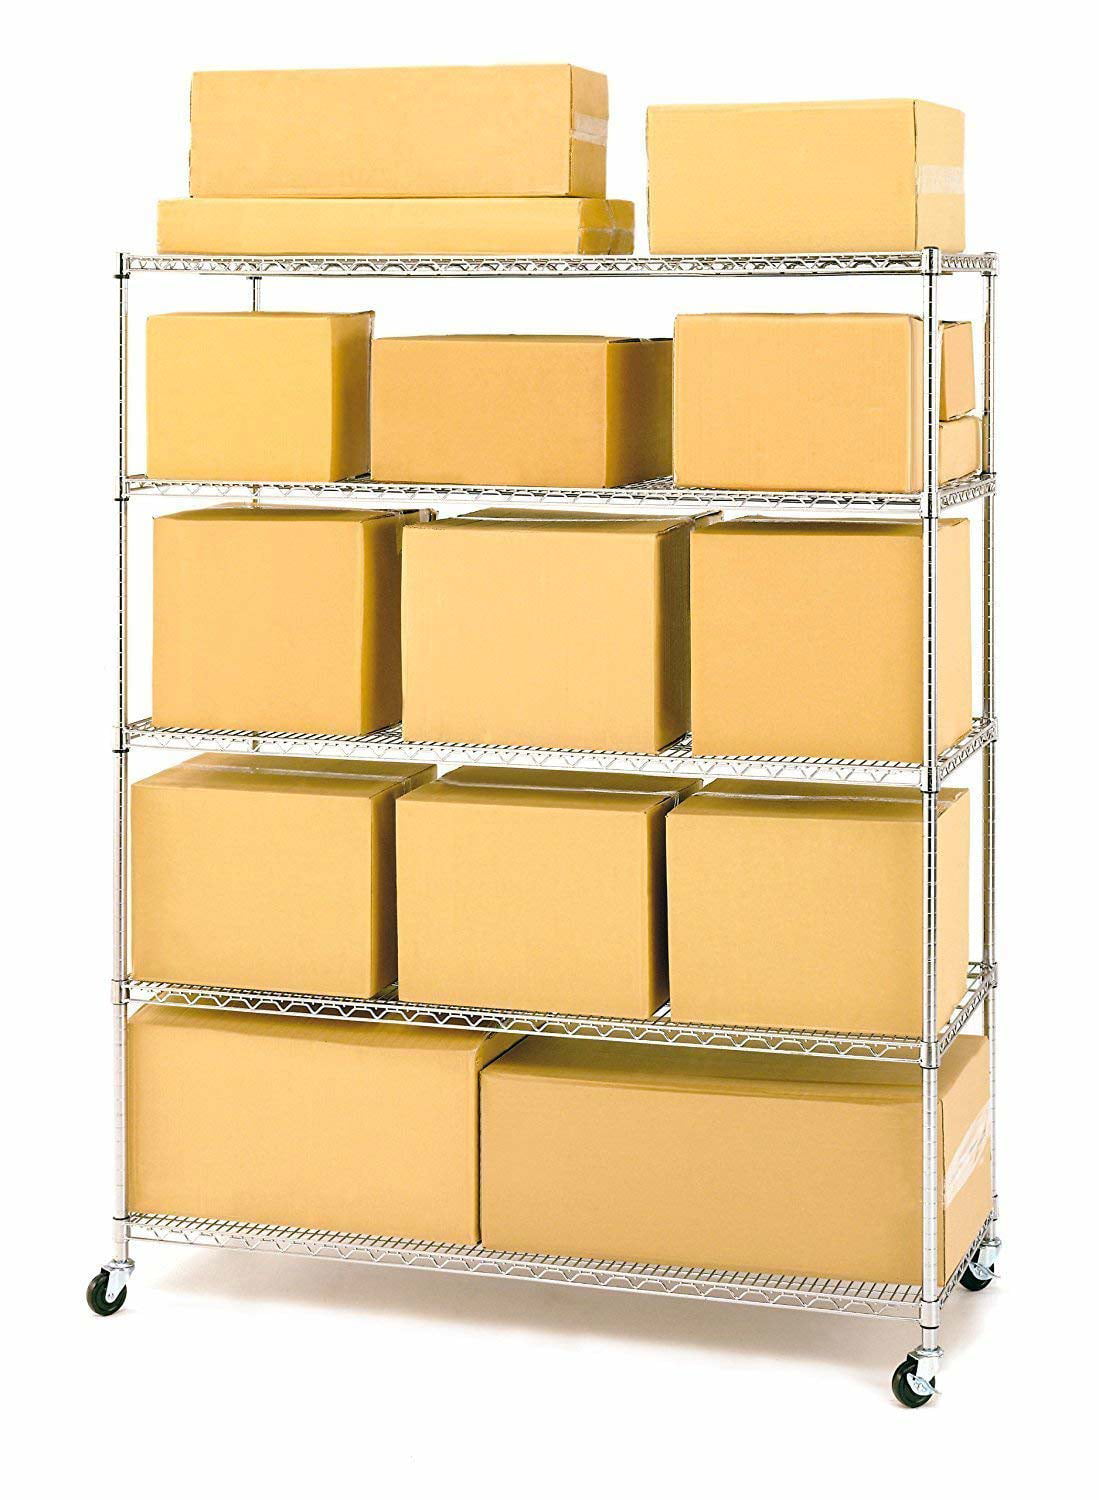 Seville Classics 5 Shelf Steel Wire, Seville Classics 5 Level Commercial Shelving With Wheels